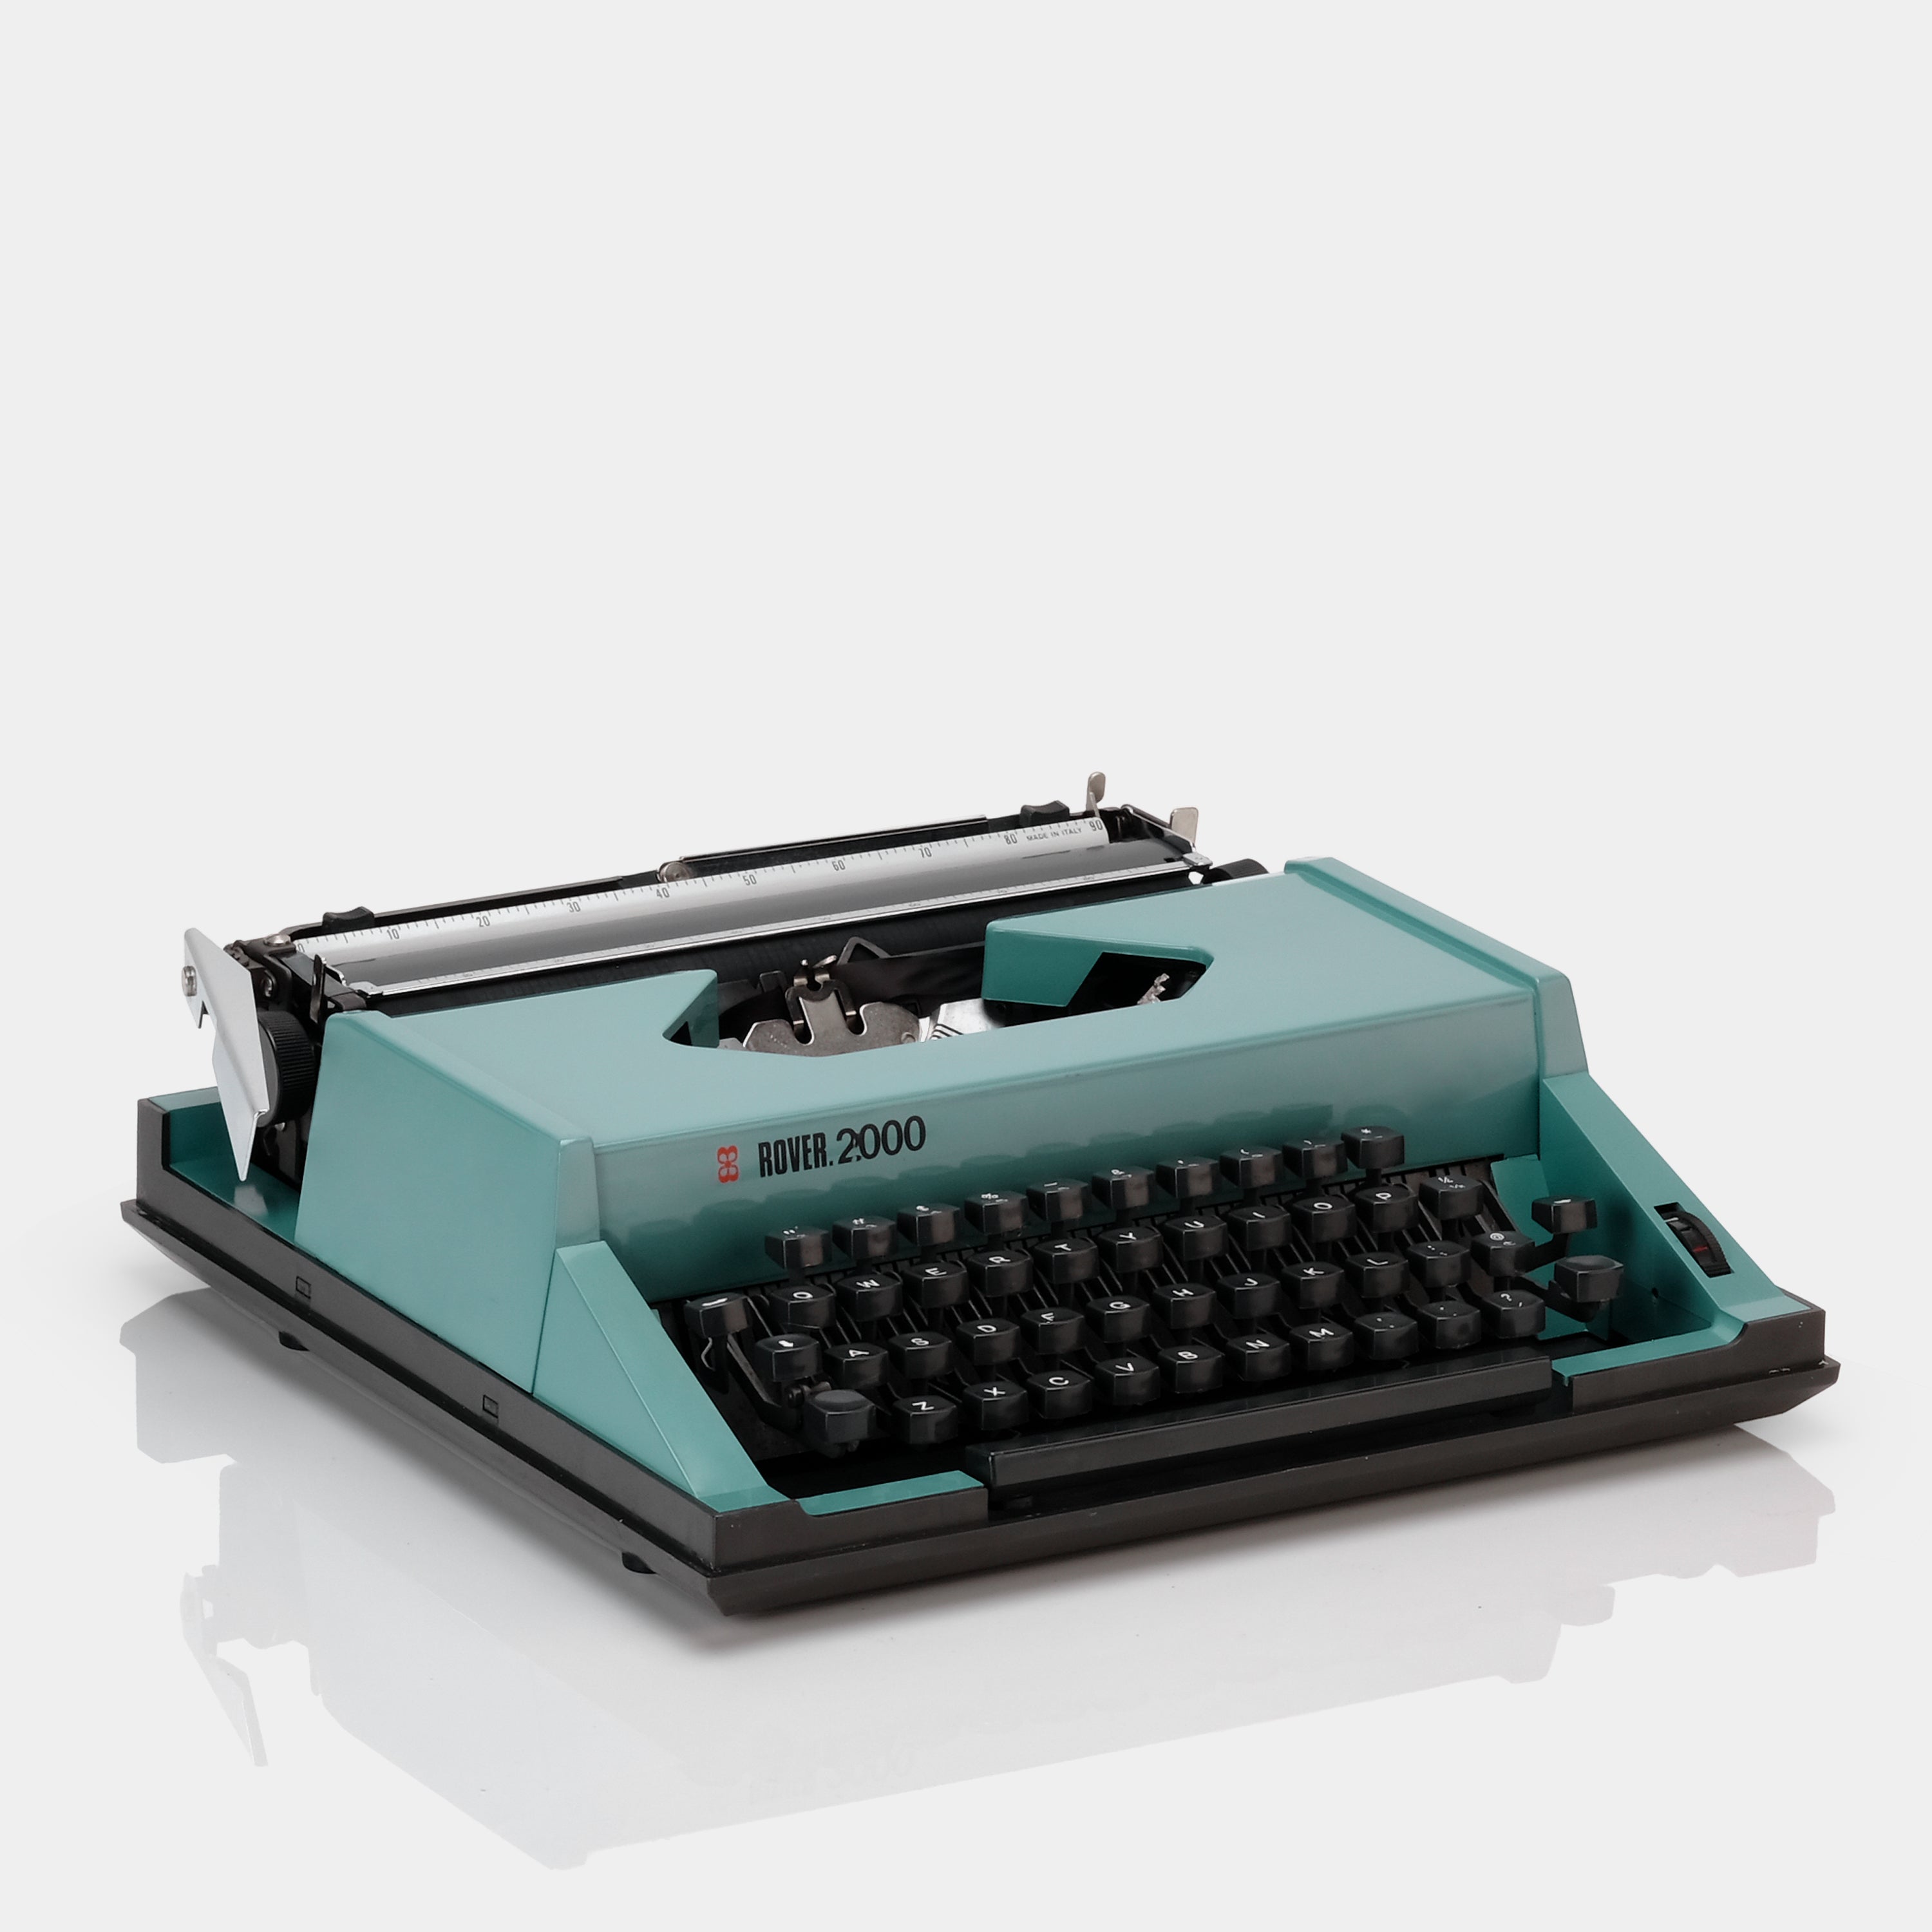 IMC Rover 2000 Turquoise Manual Typewriter and Case